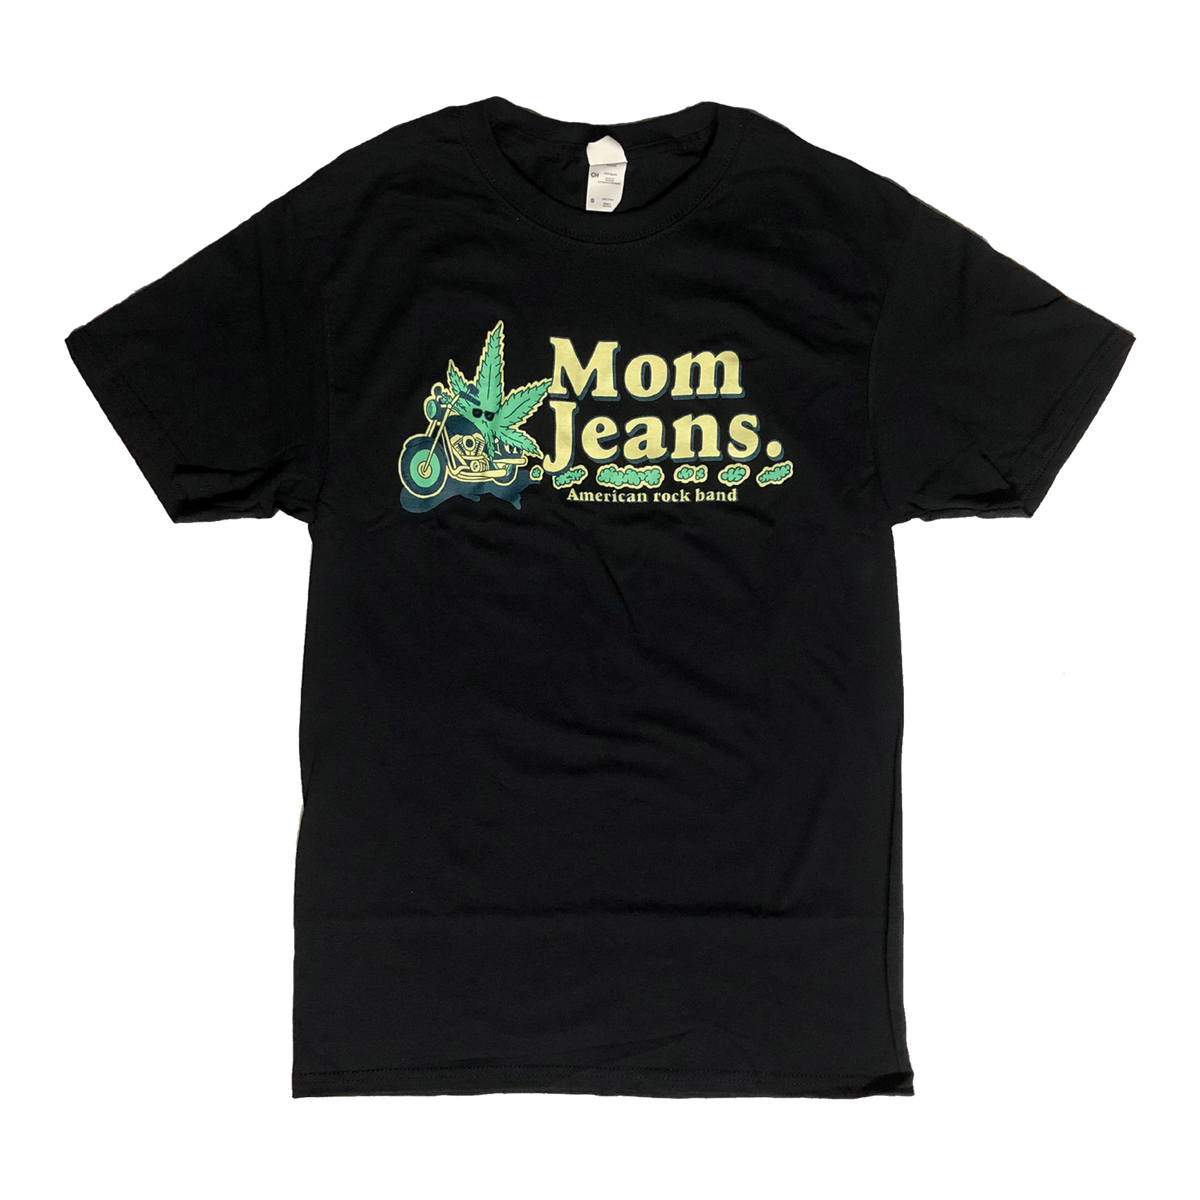 Mom Jeans - Motorcycle Shirt (Black)